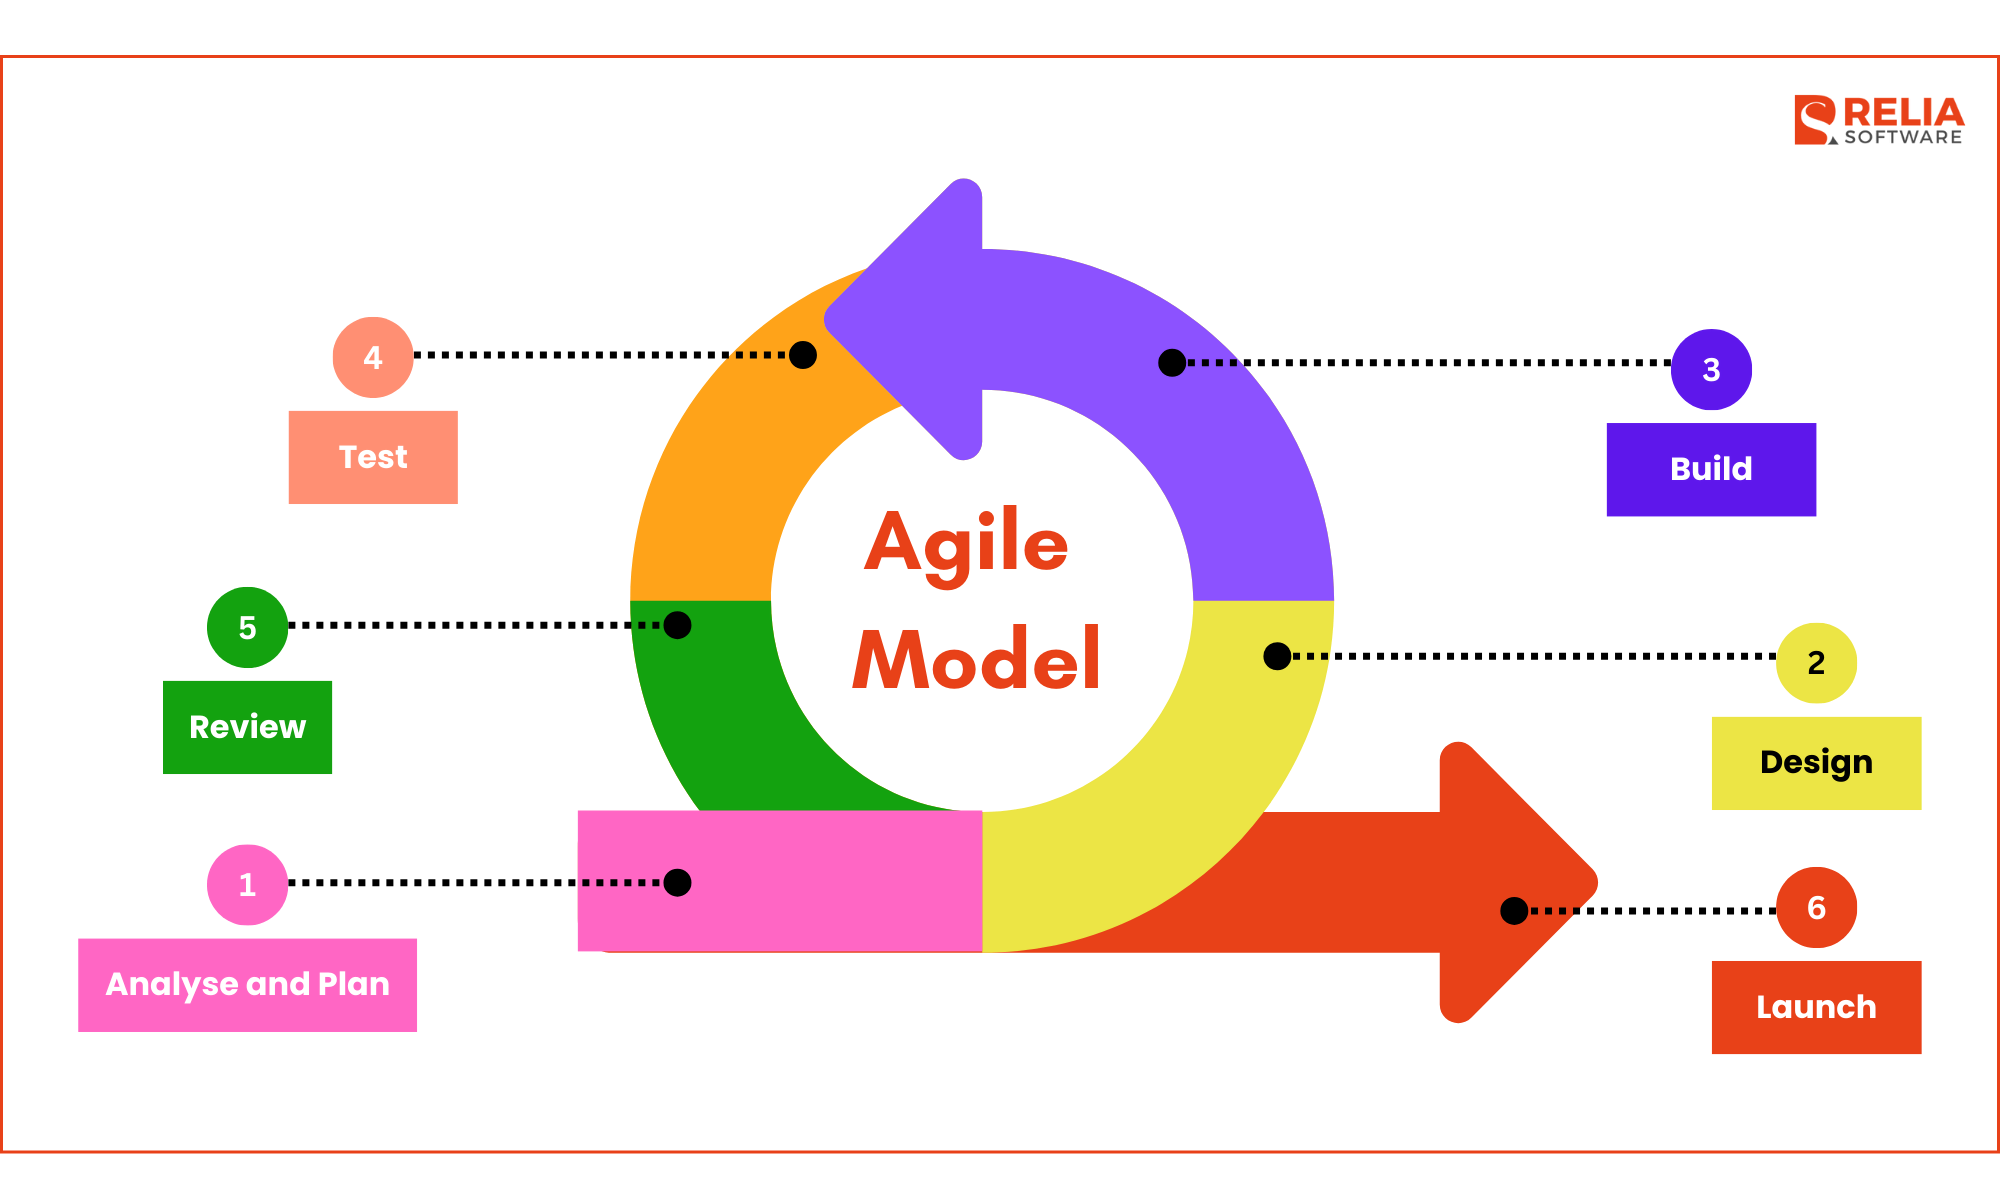 The Agile Model is a flexible and iterative approach to software development